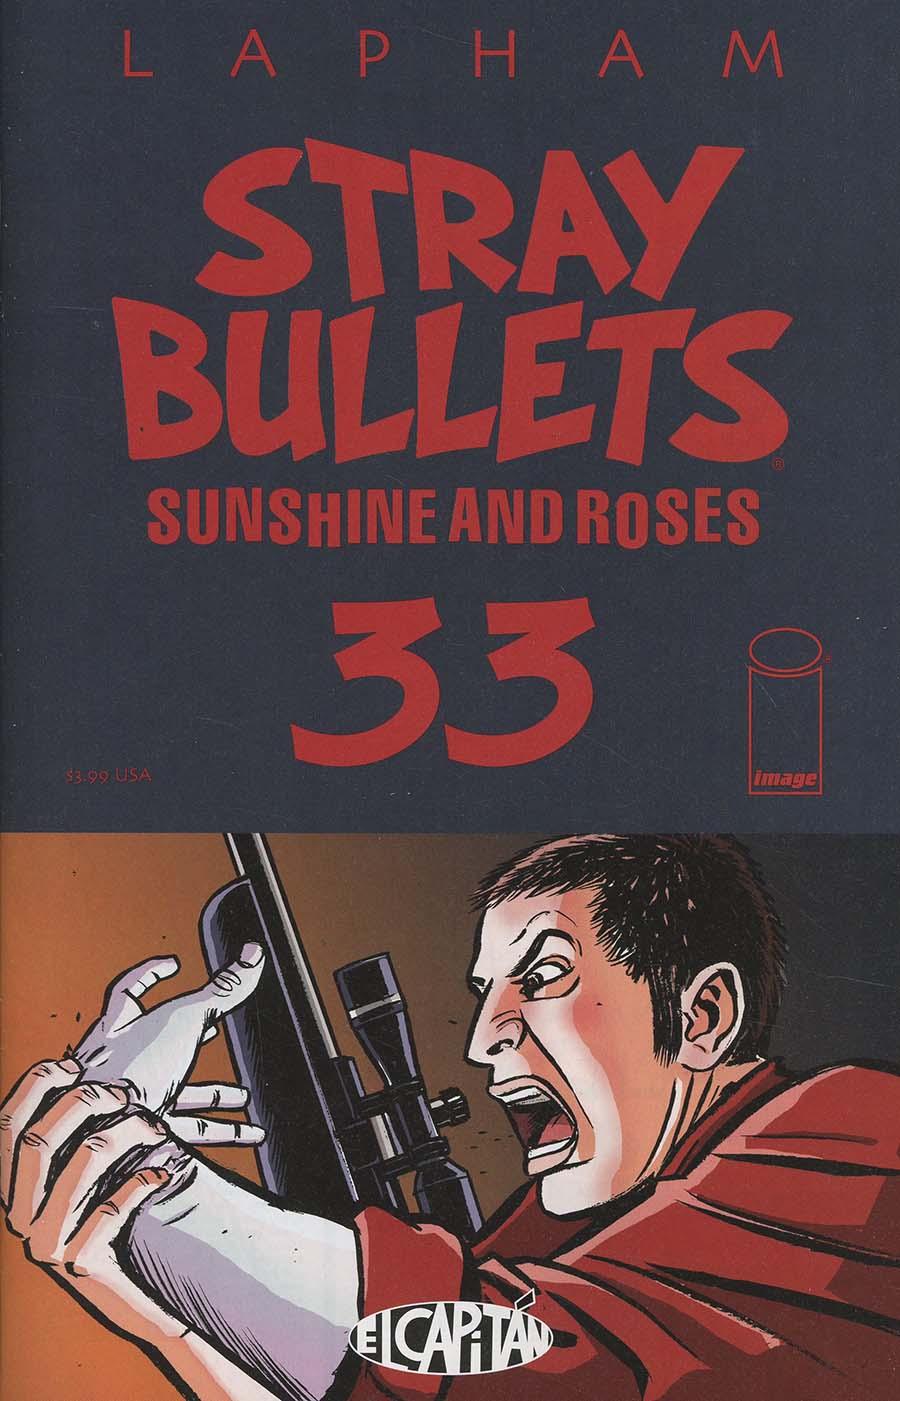 Stray Bullets Sunshine And Roses Vol. 1 #33